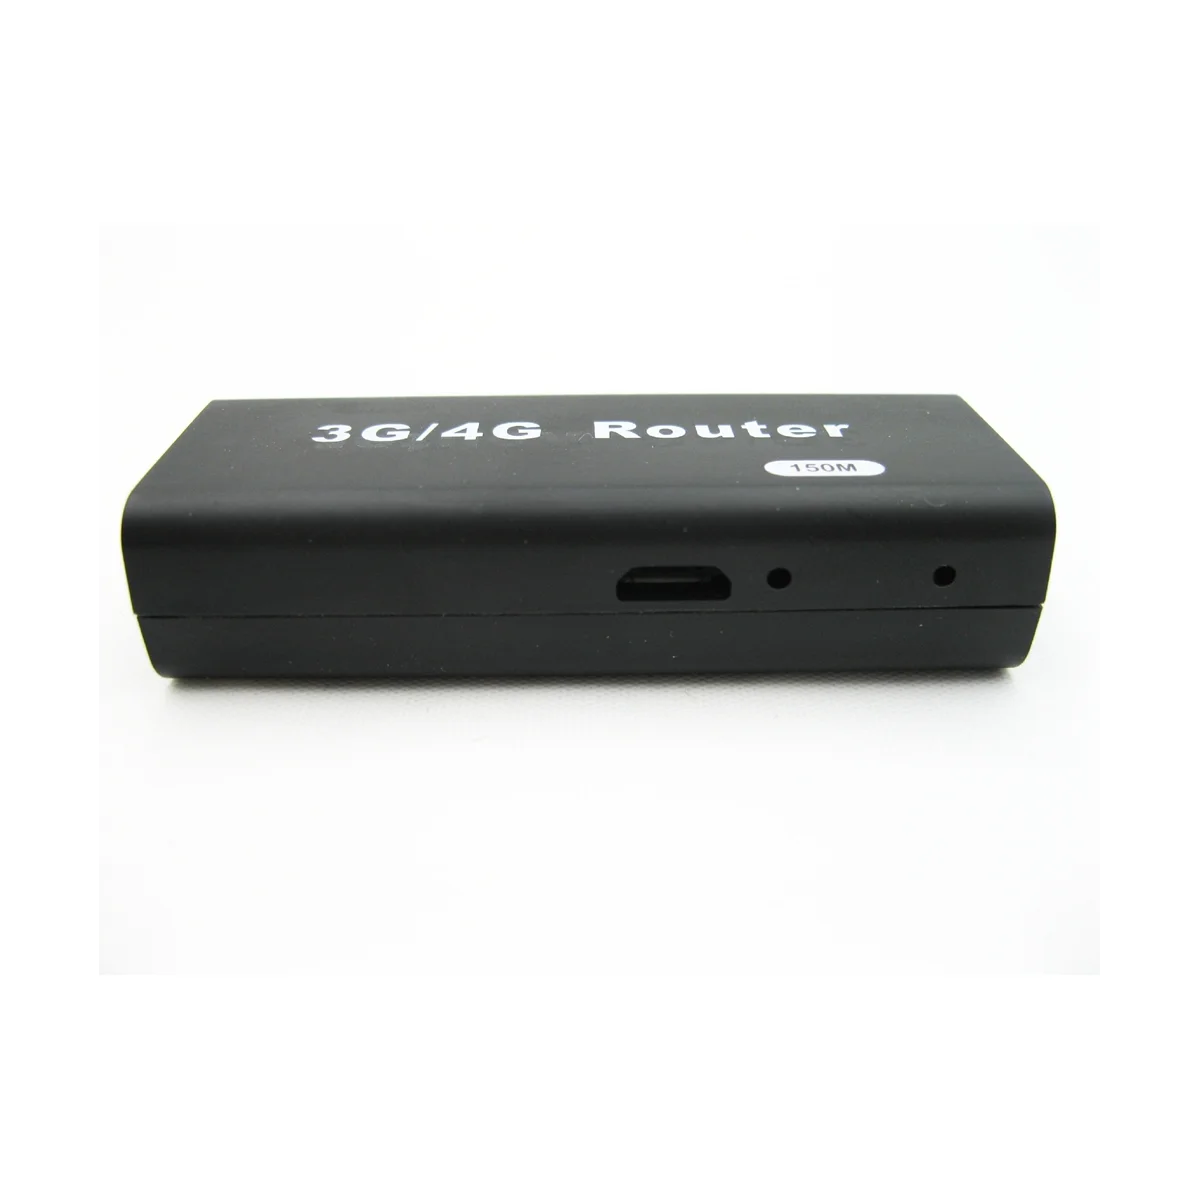 Mini Portable 3G/4G WiFi Wlan Hotspot WiFi Hotspot 150Mbps RJ45 USB Wireless Router with USB Cable images - 6